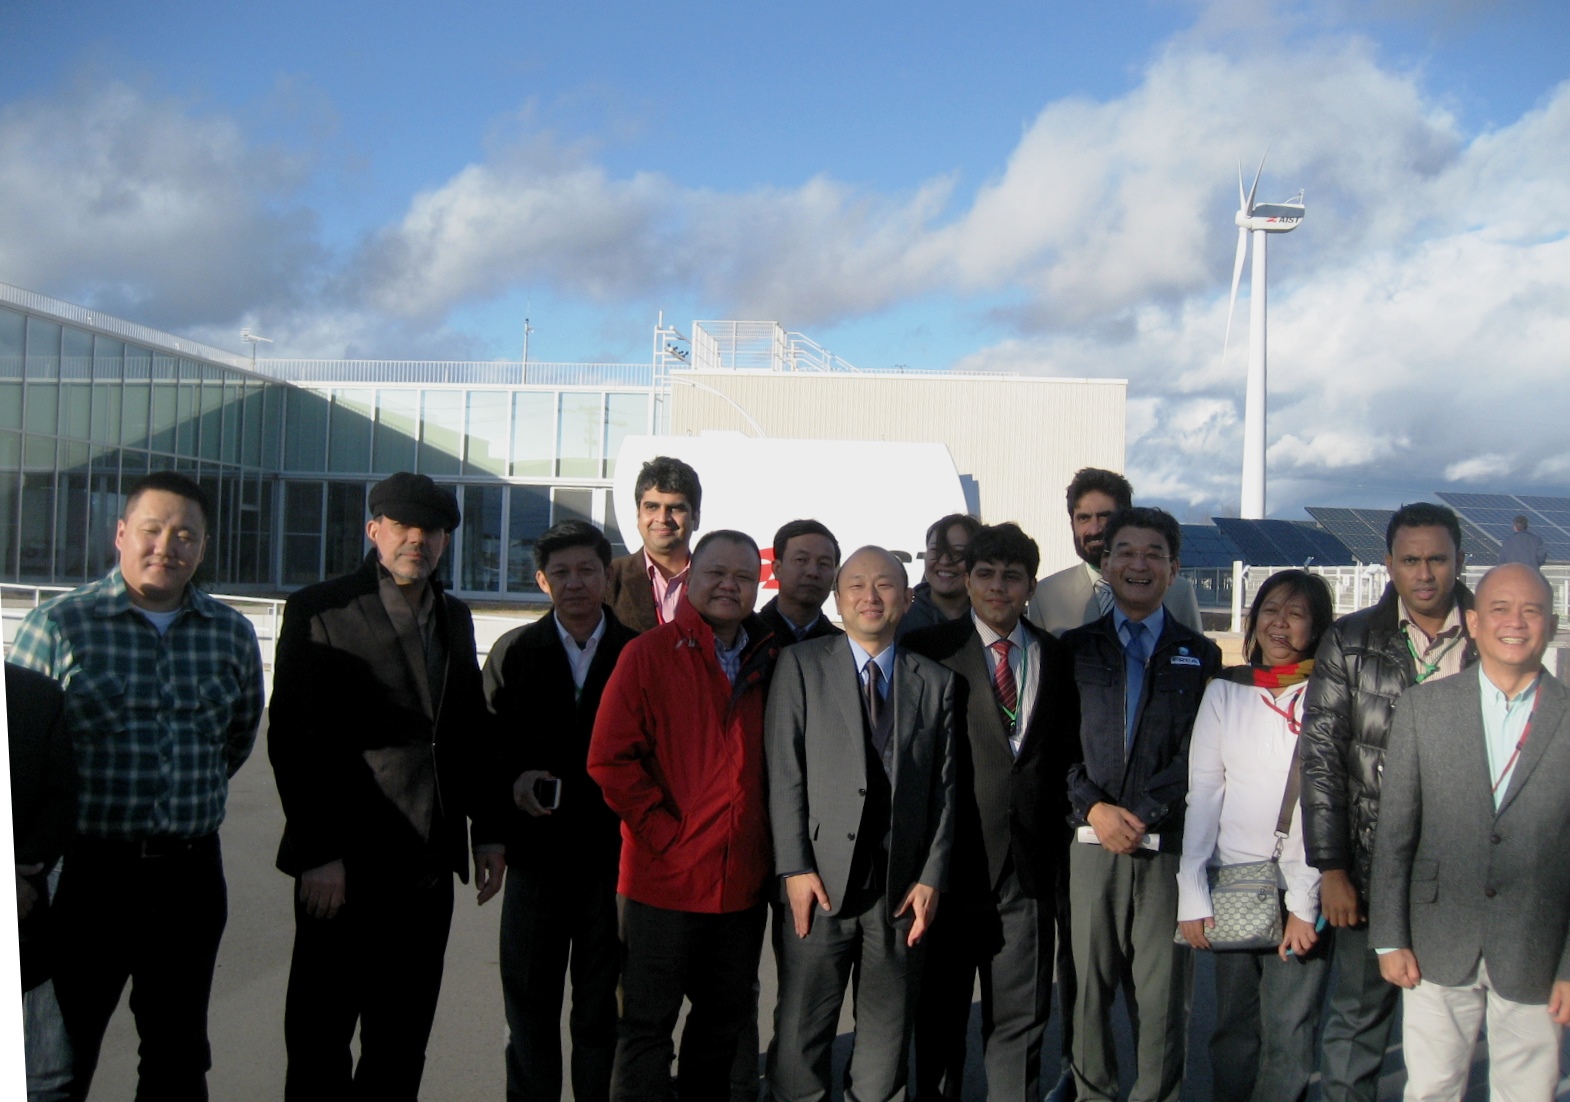 Mission participants during their visit to FREA to examine the latest wind and solar power technologies.